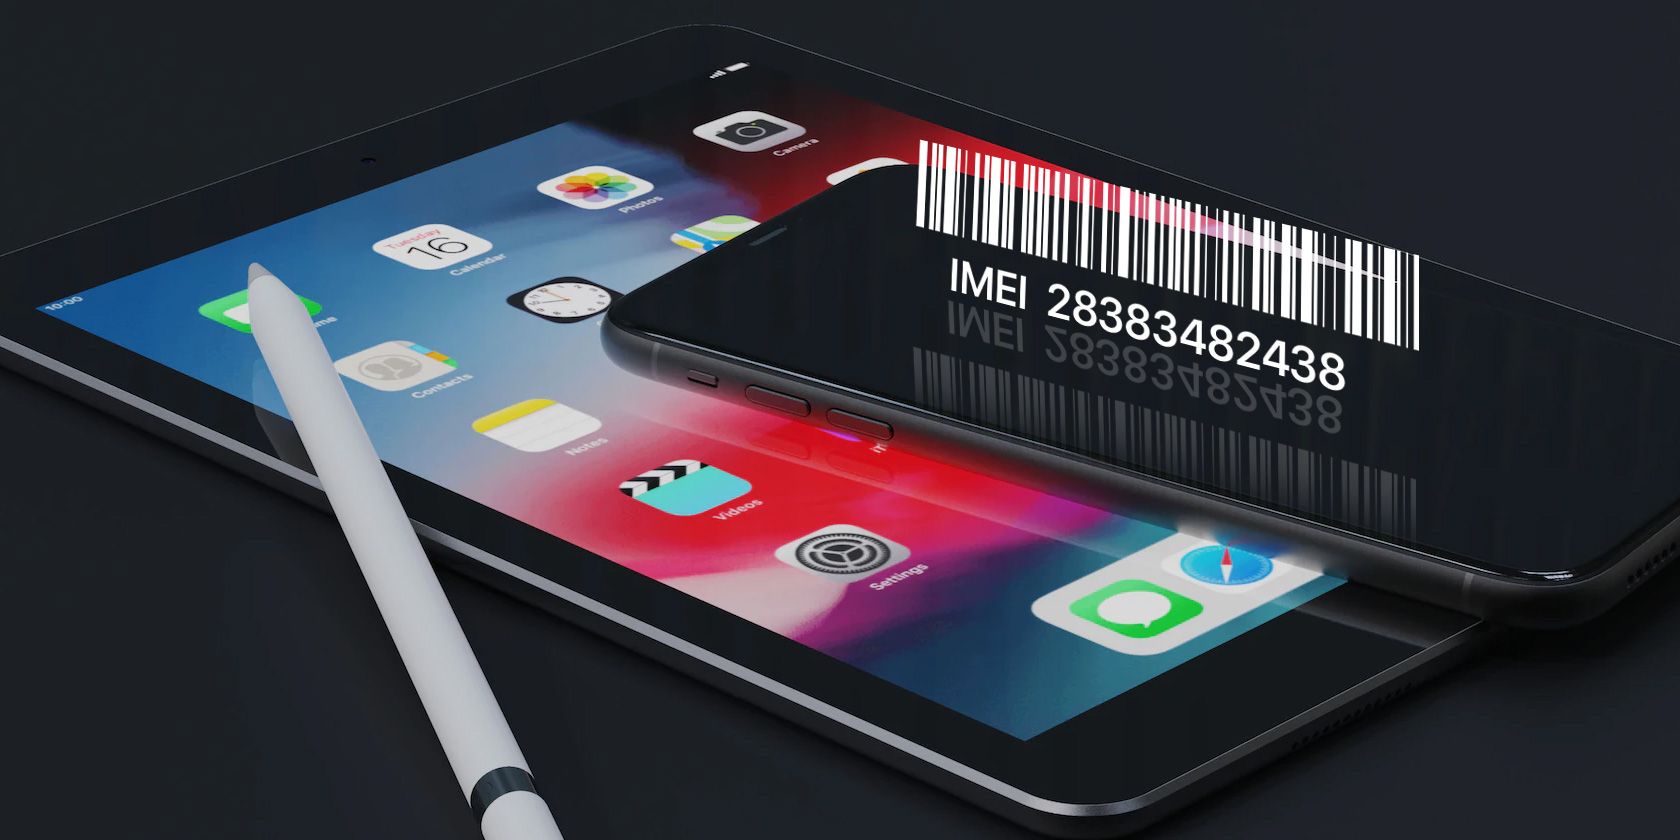 9 Ways to Find the IMEI Number on Your iPhone or iPad